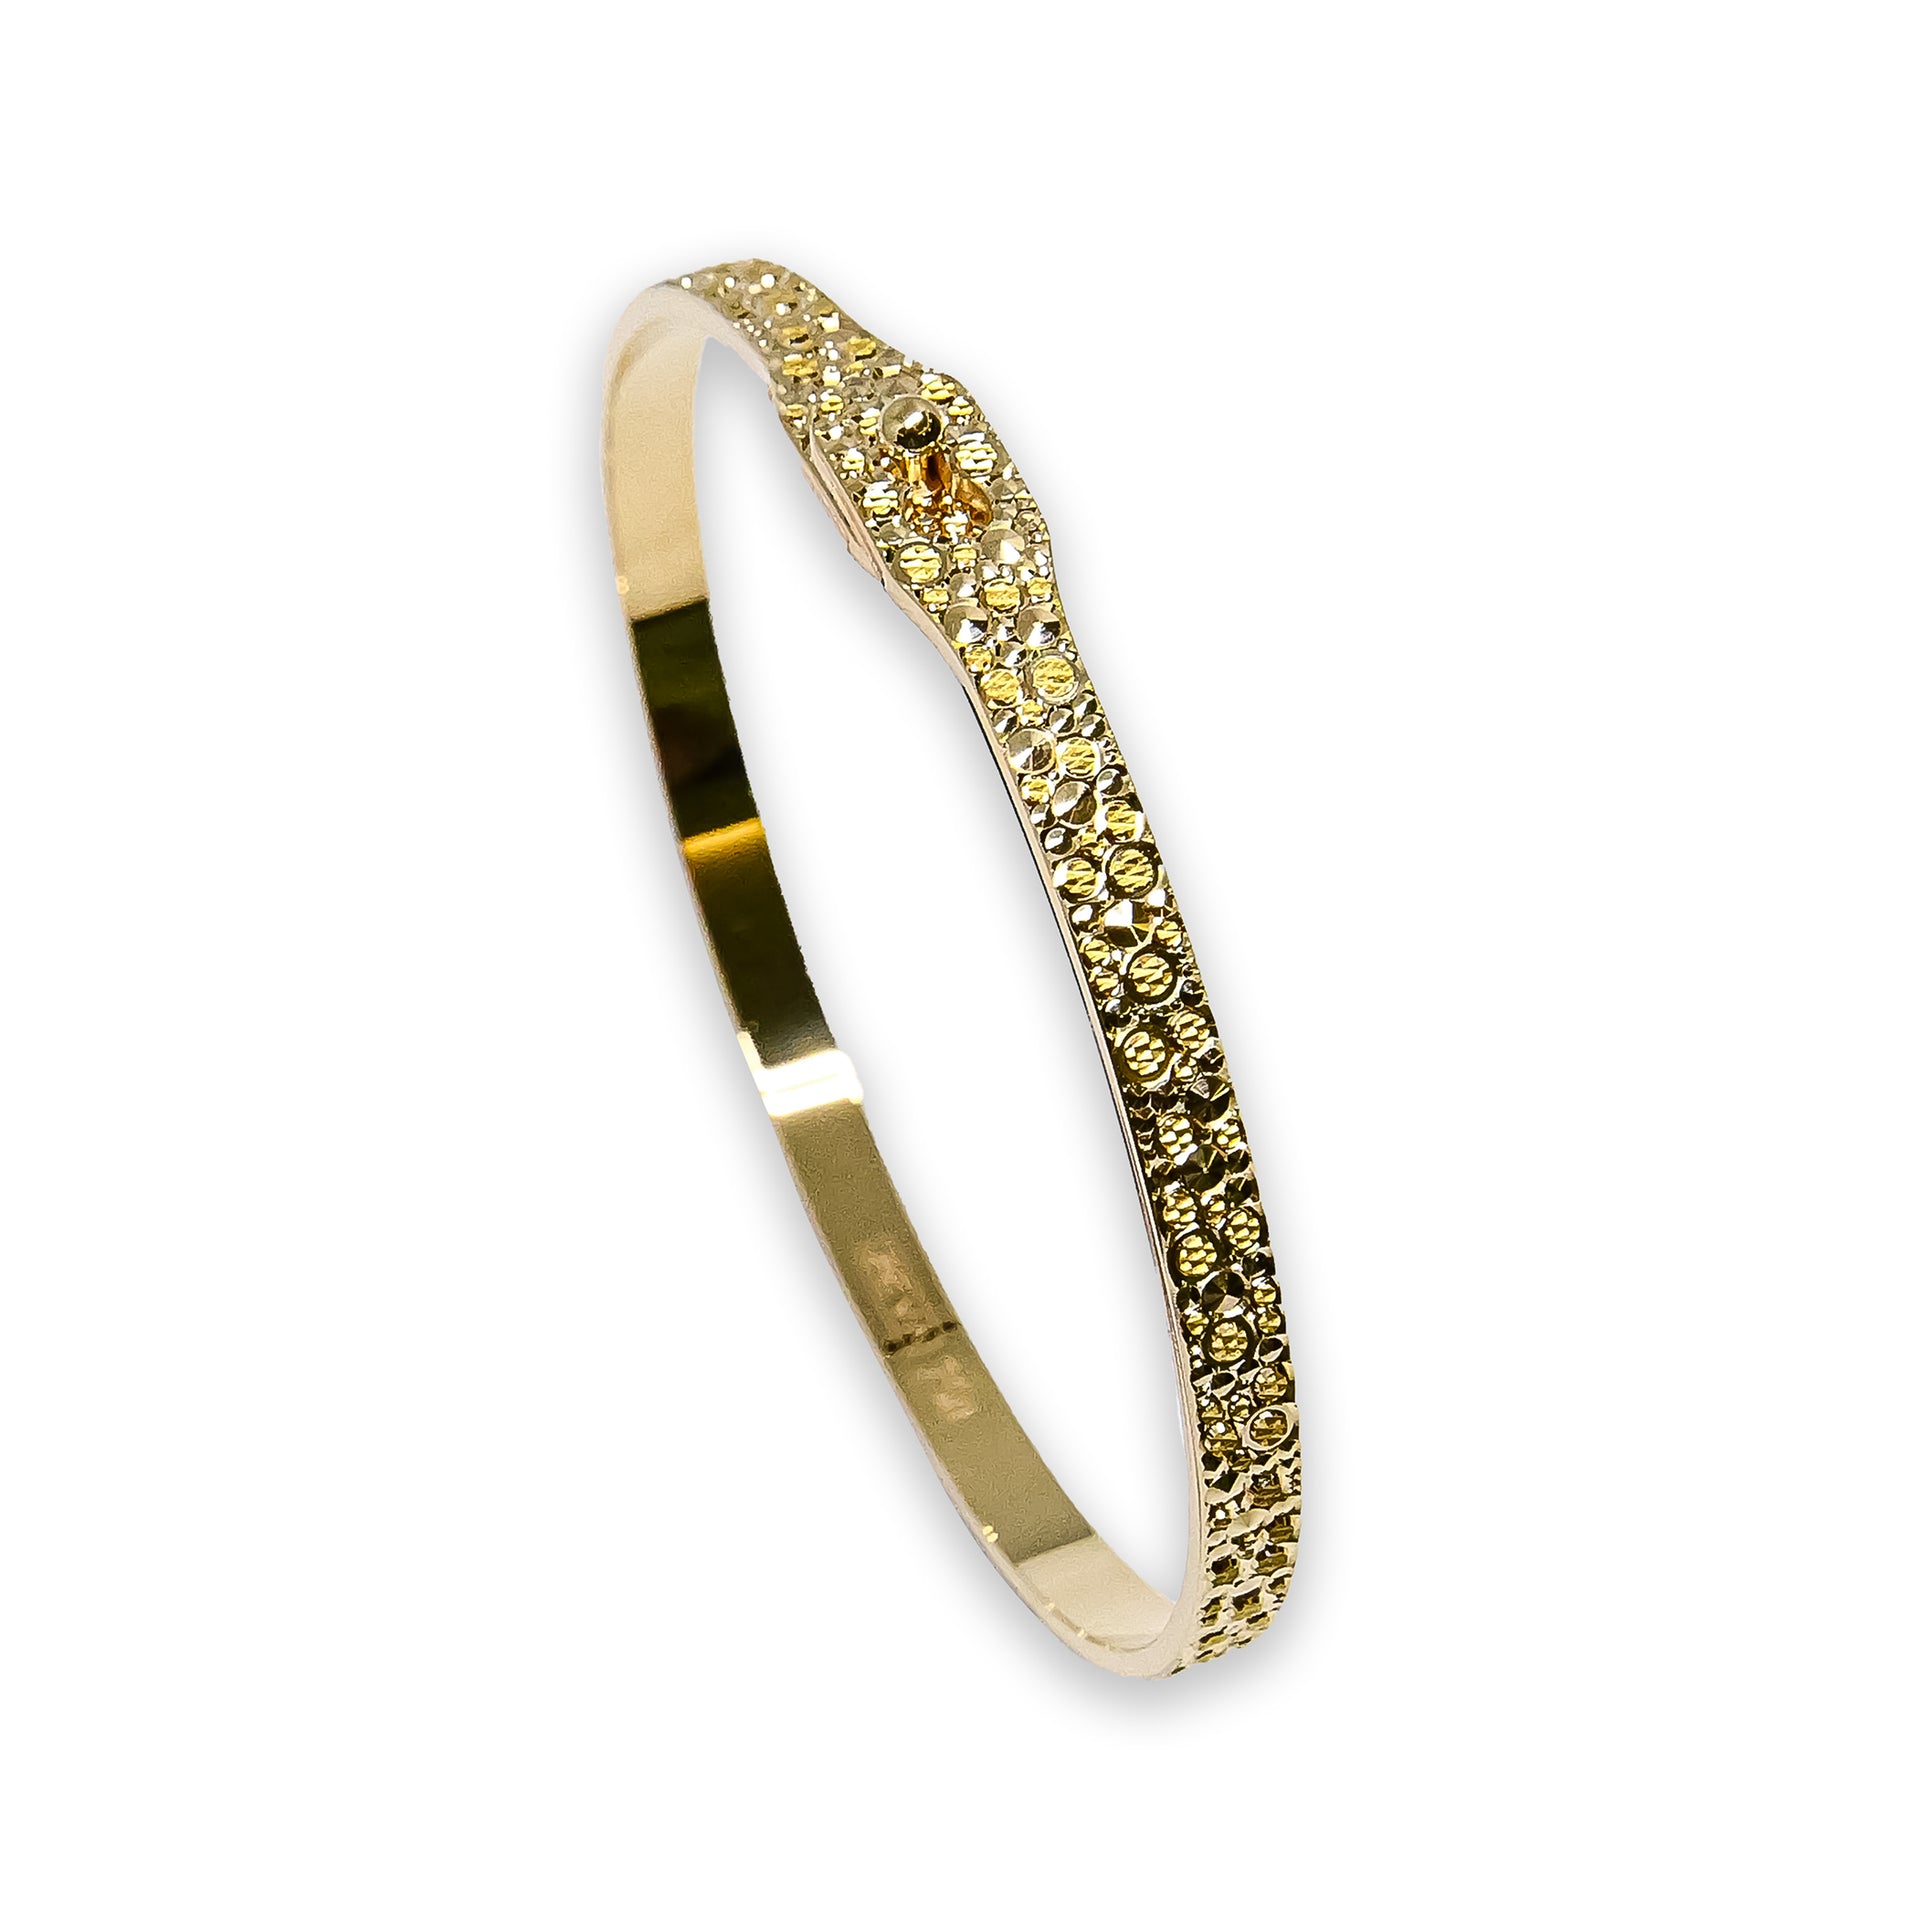 Bracelet FROST 4mm flexible with pin claps yellow gold 18k 750